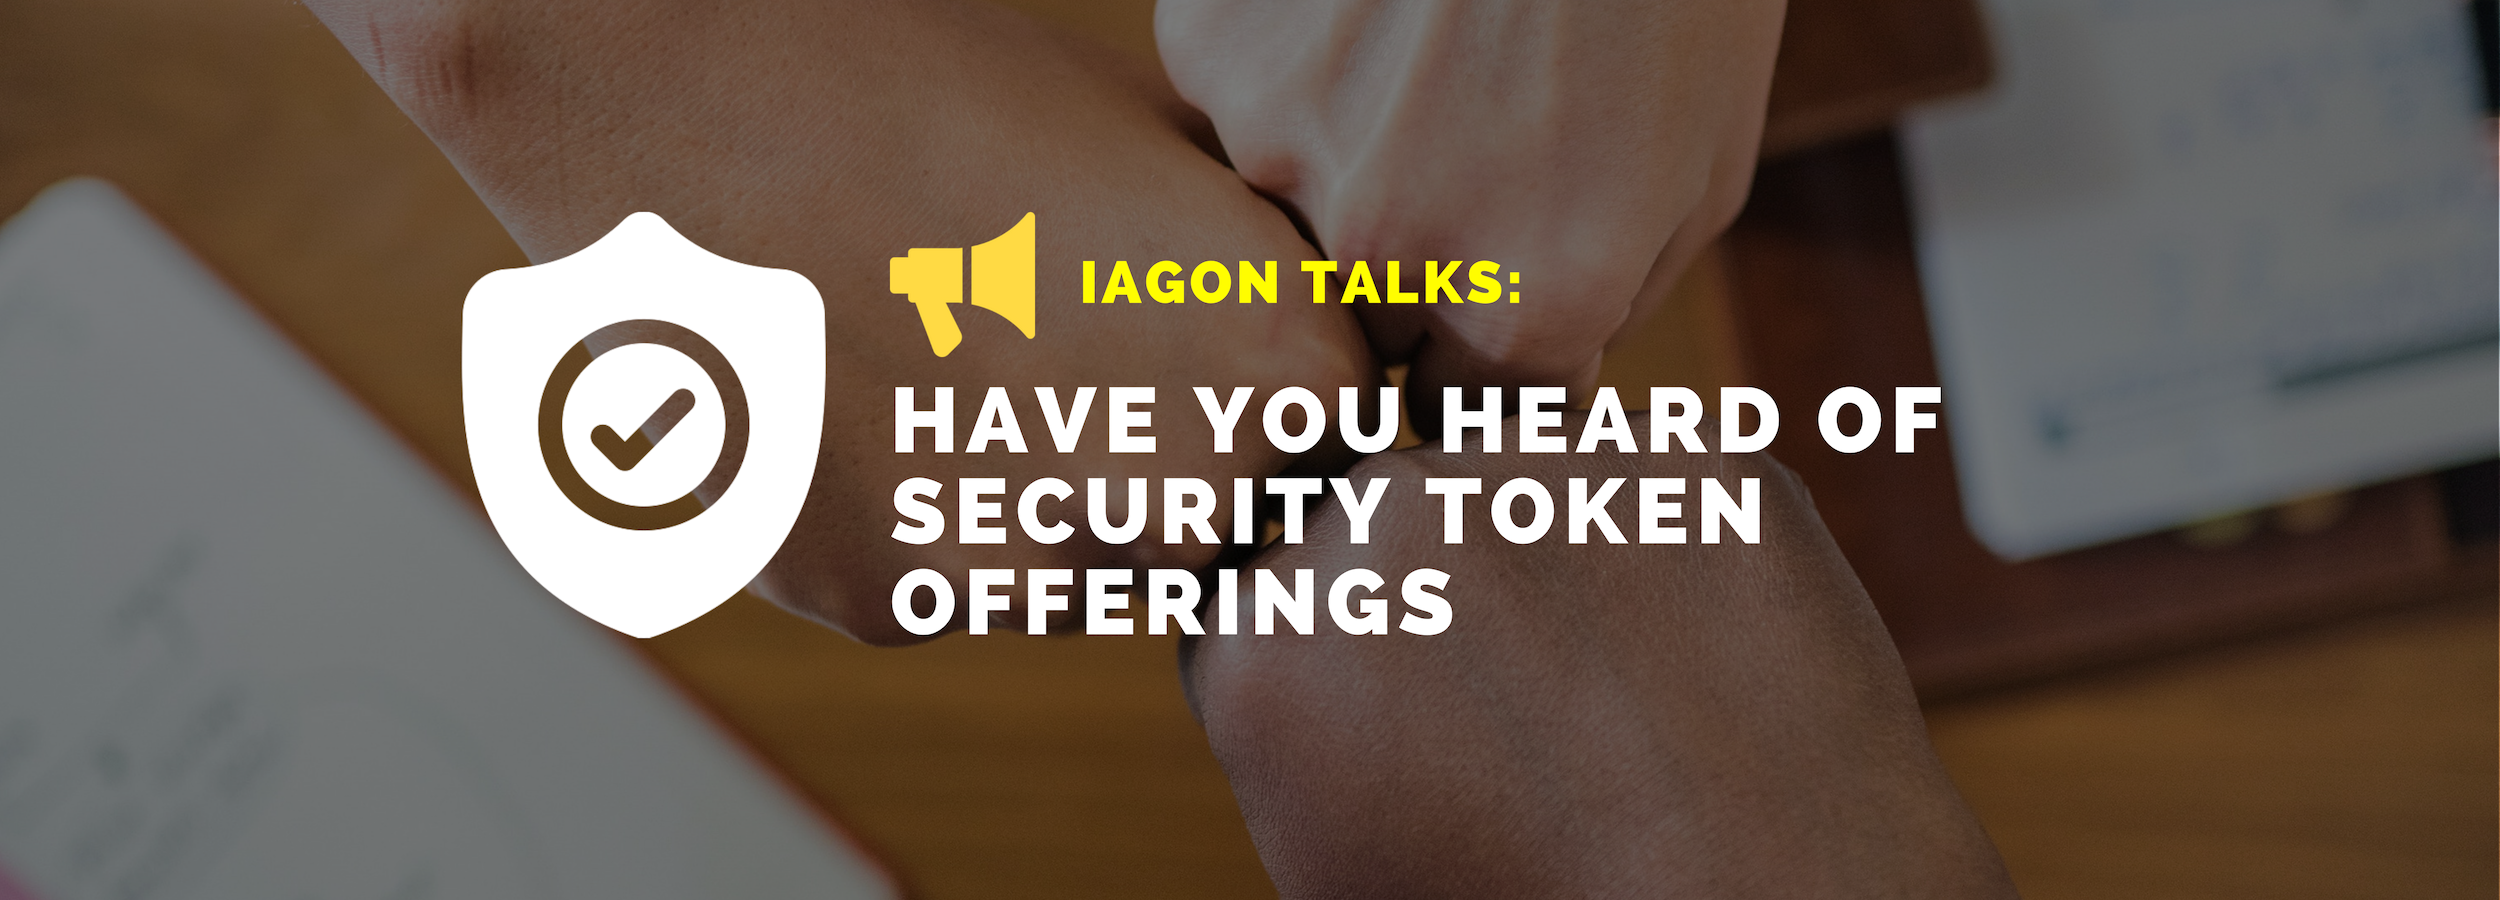 IAGON Talks: Have you Heard of Security Token Offerings